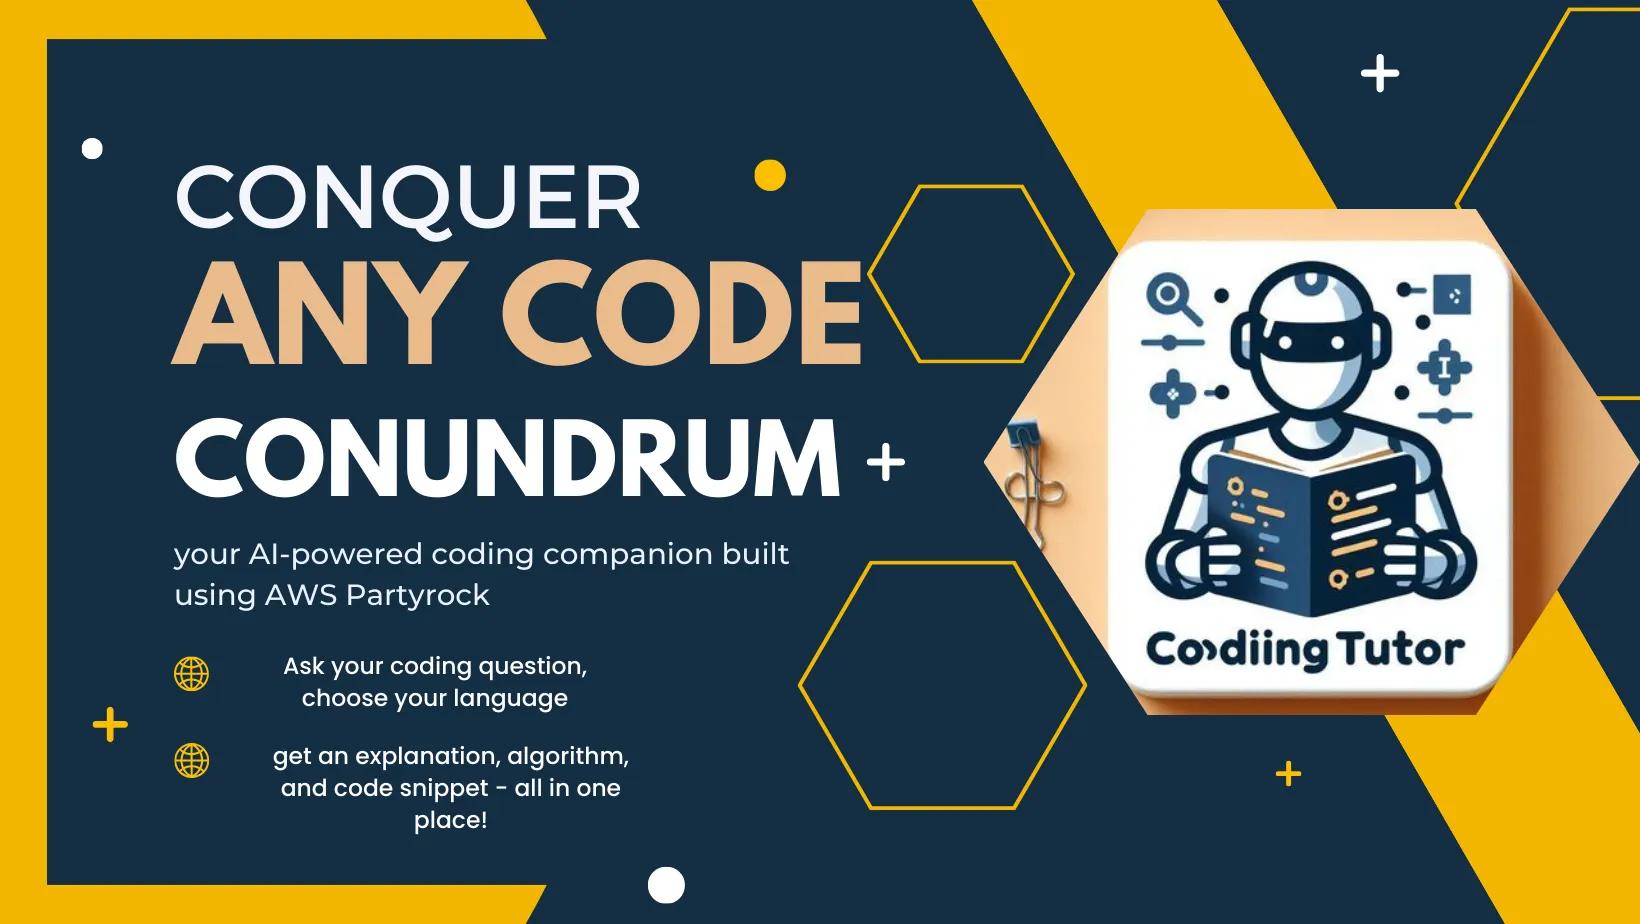 Conquer any Code Conundrum with CodingTutor!